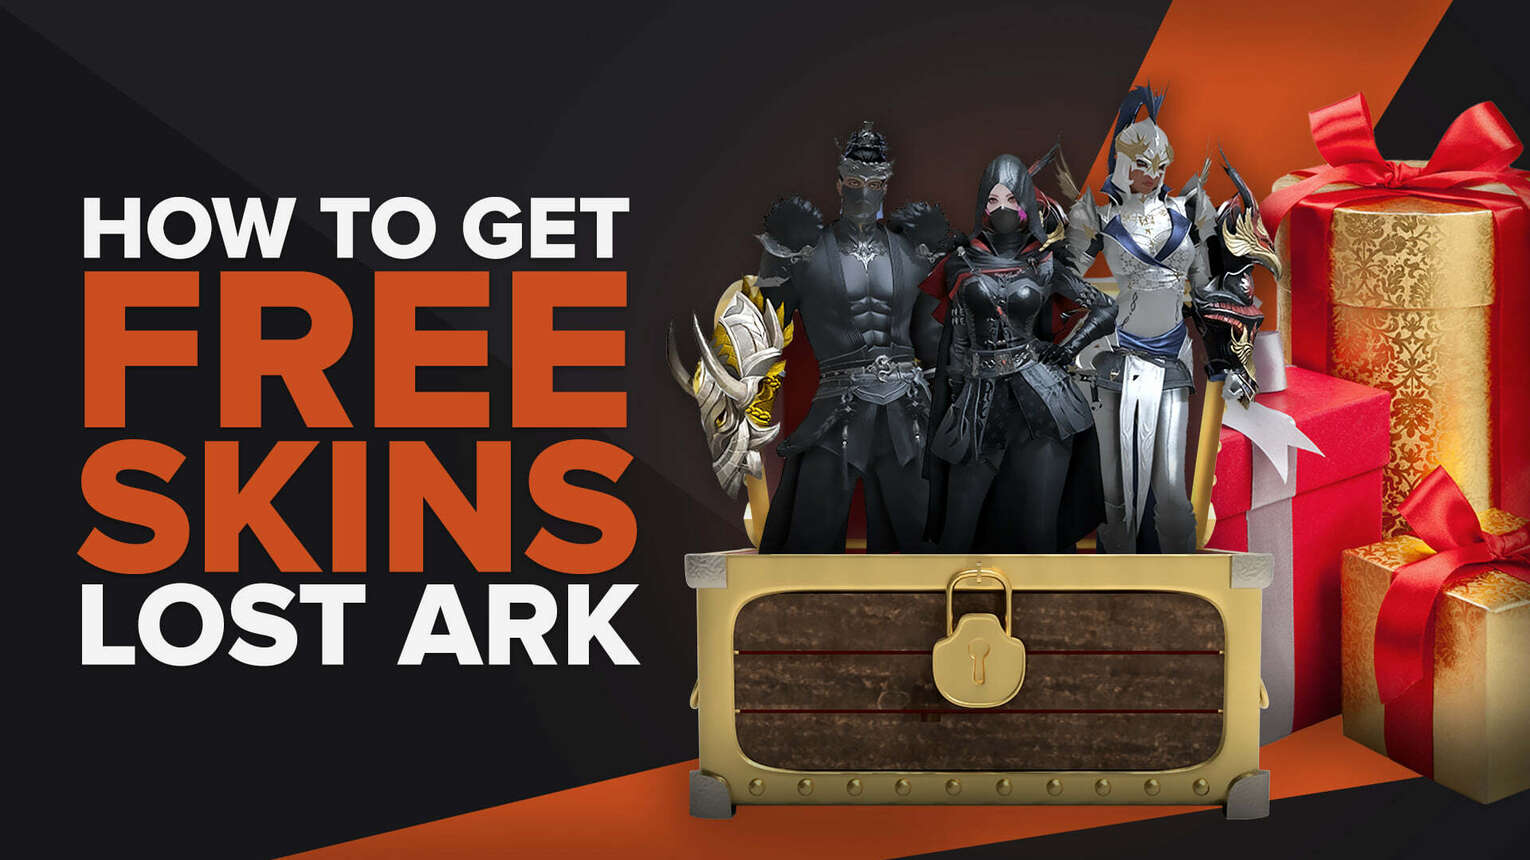 How To Get Any Lost Ark Skins and Items For Free [Genuine Methods]